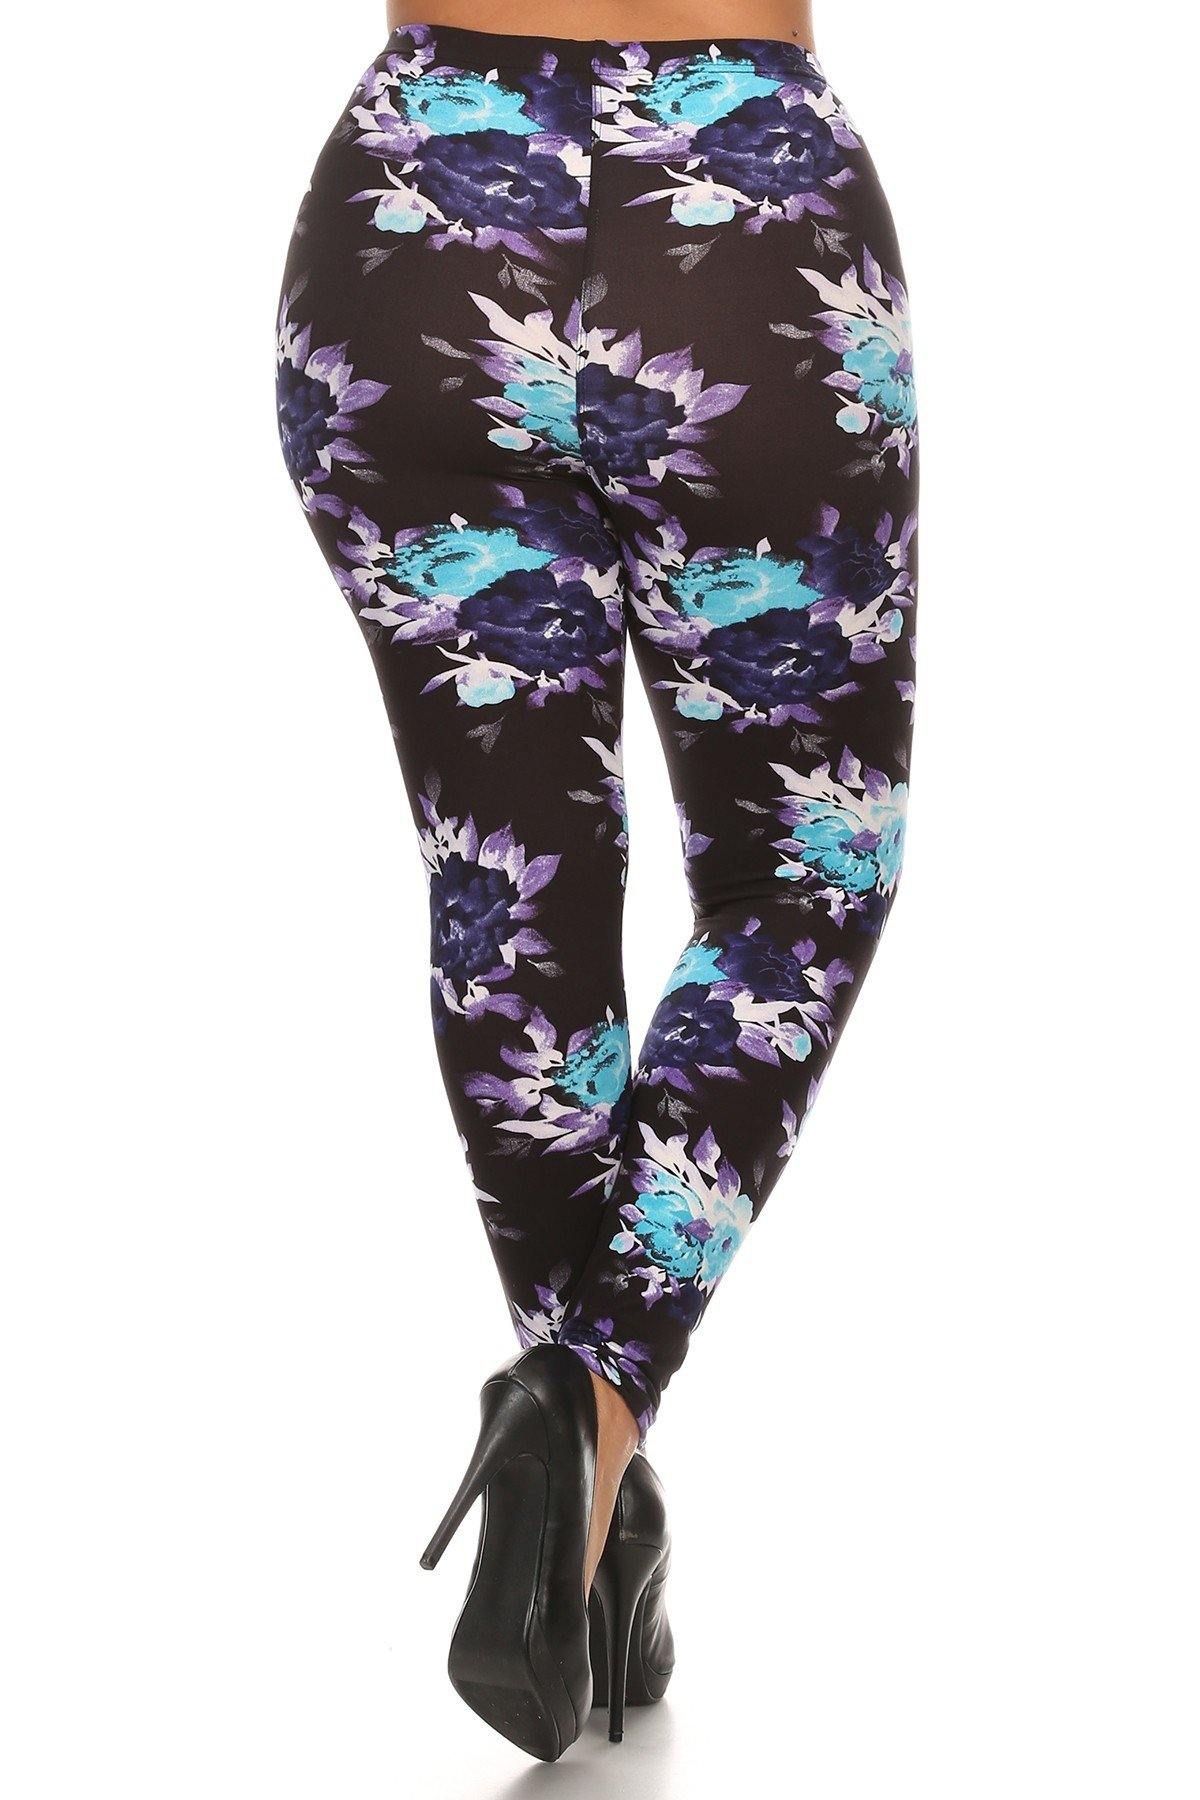 Plus Size Floral Print, Full Length Leggings In A Slim Fitting Style With A Banded High Waist - Pearlara